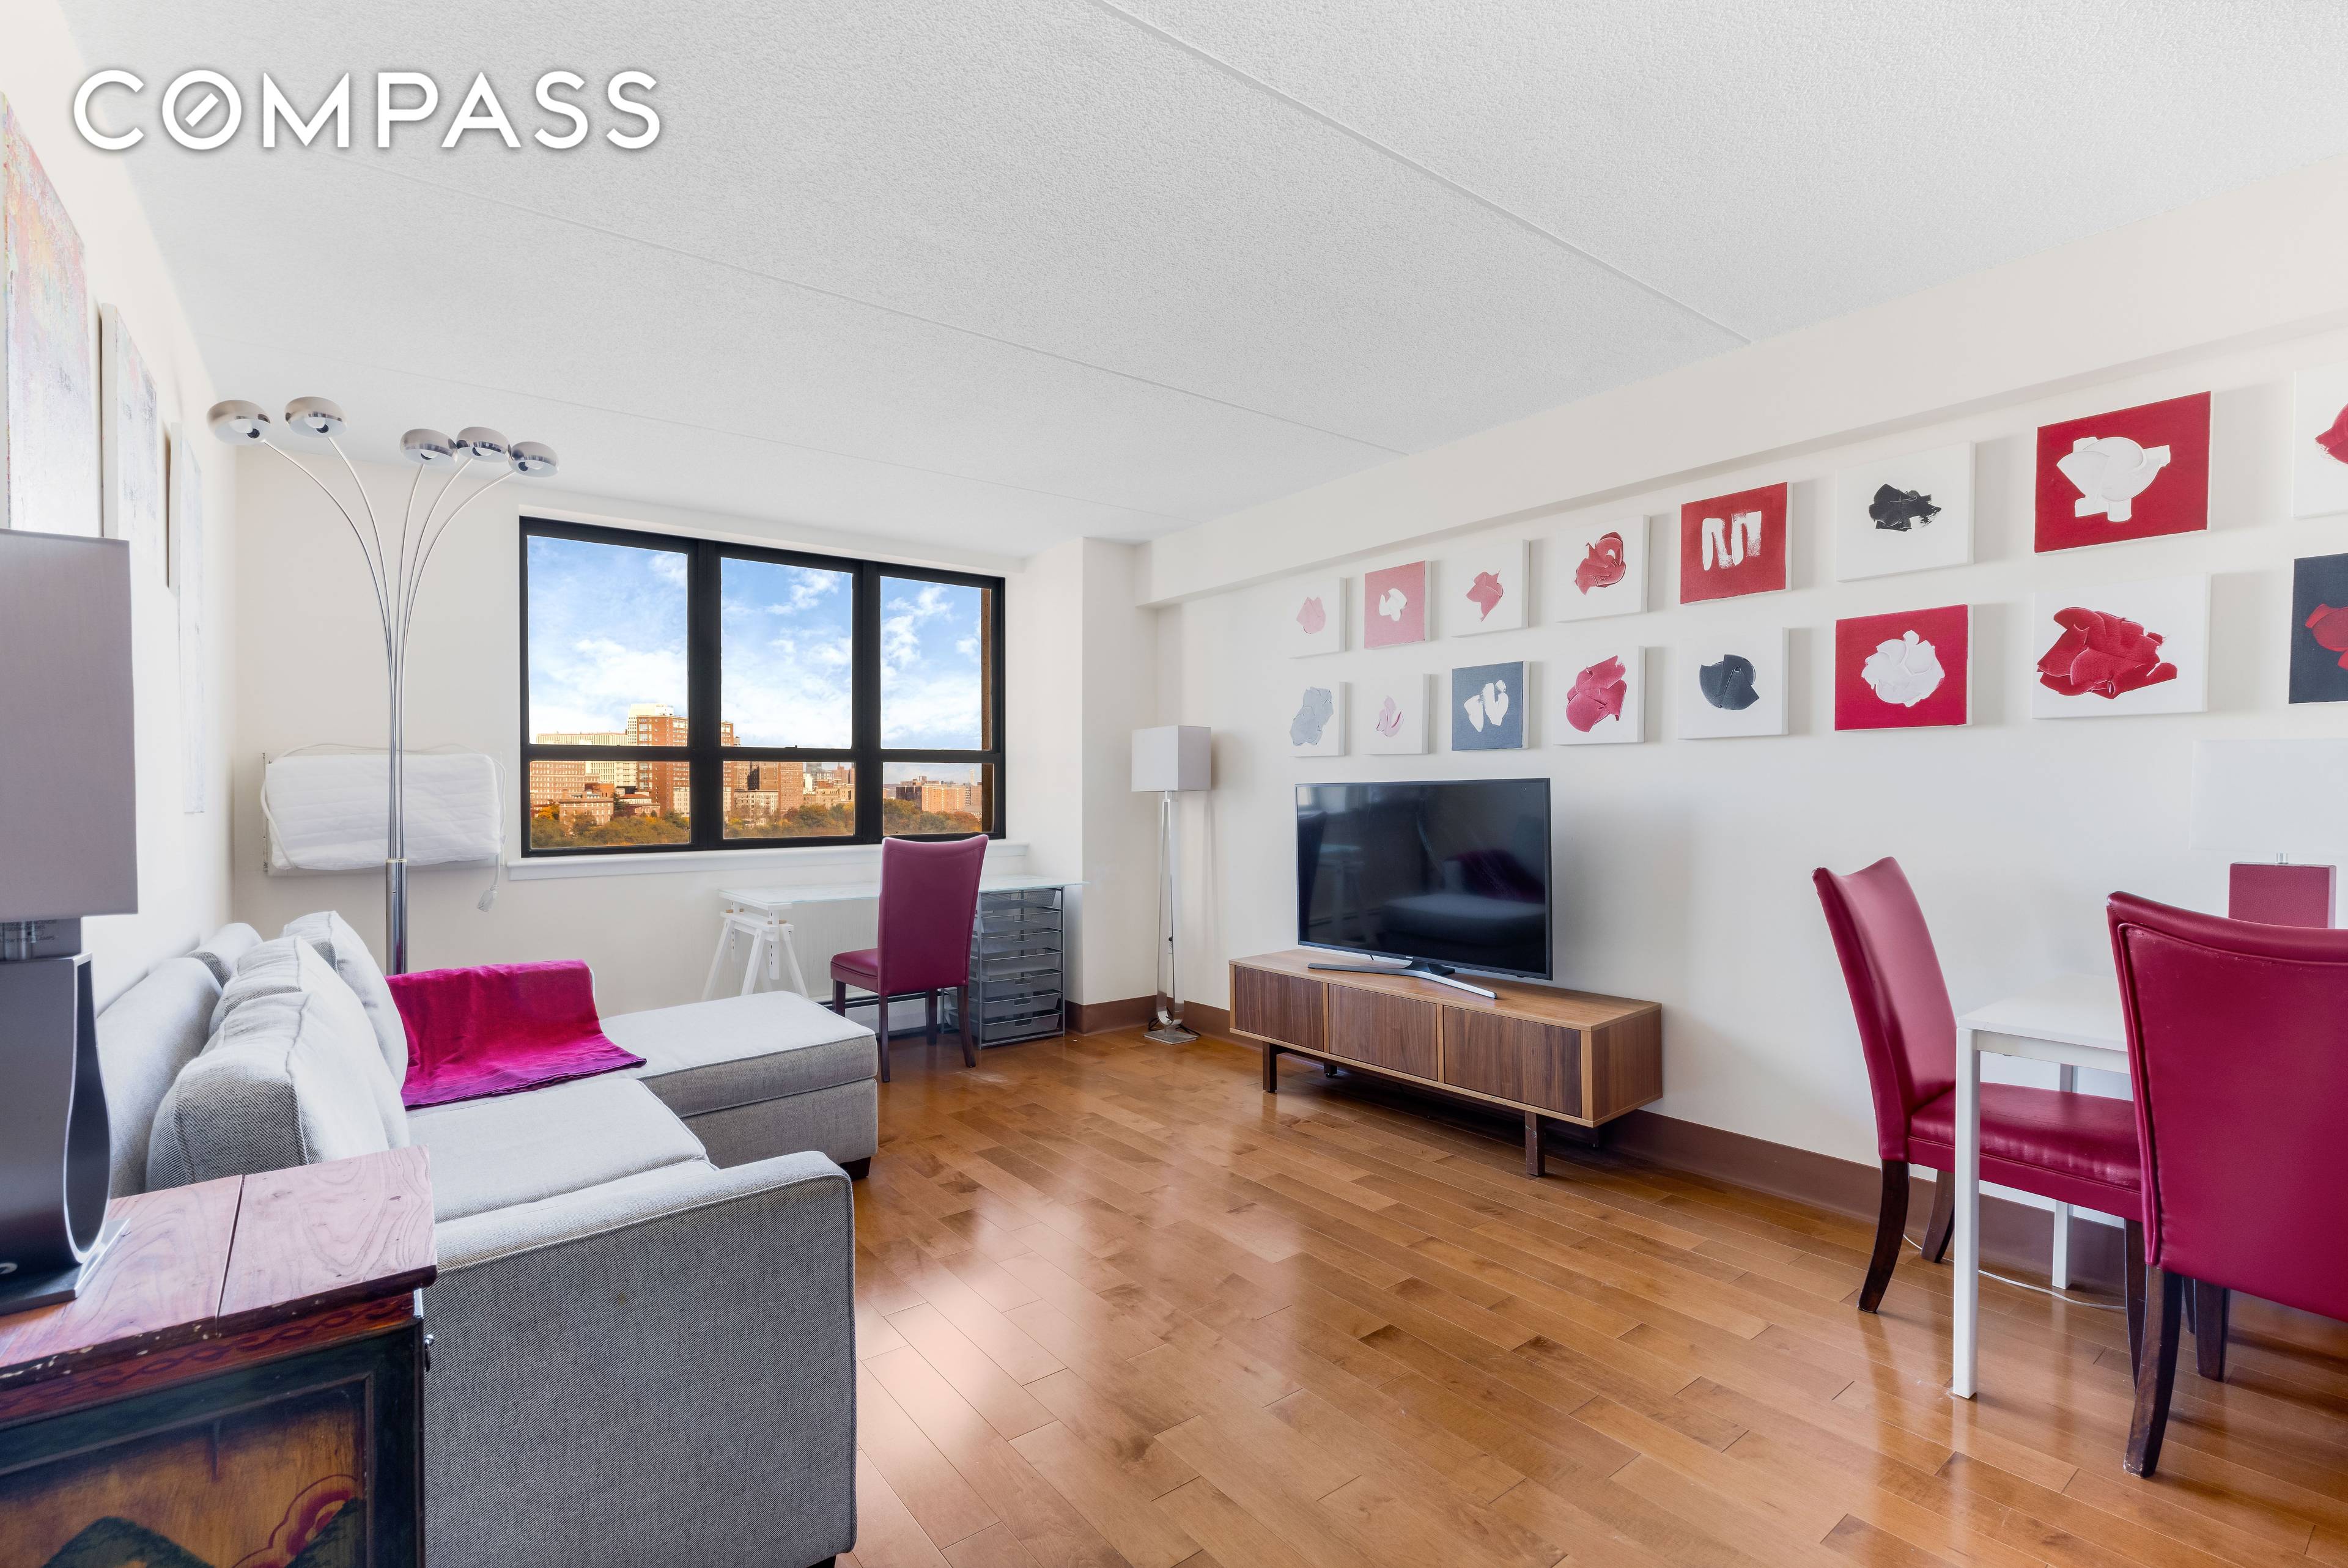 Condo Full time doorman ______________________________ Phenomenal uptown views and a great layout await in this spacious Upper West Side one bedroom, one bathroom home across the street from Central Park.